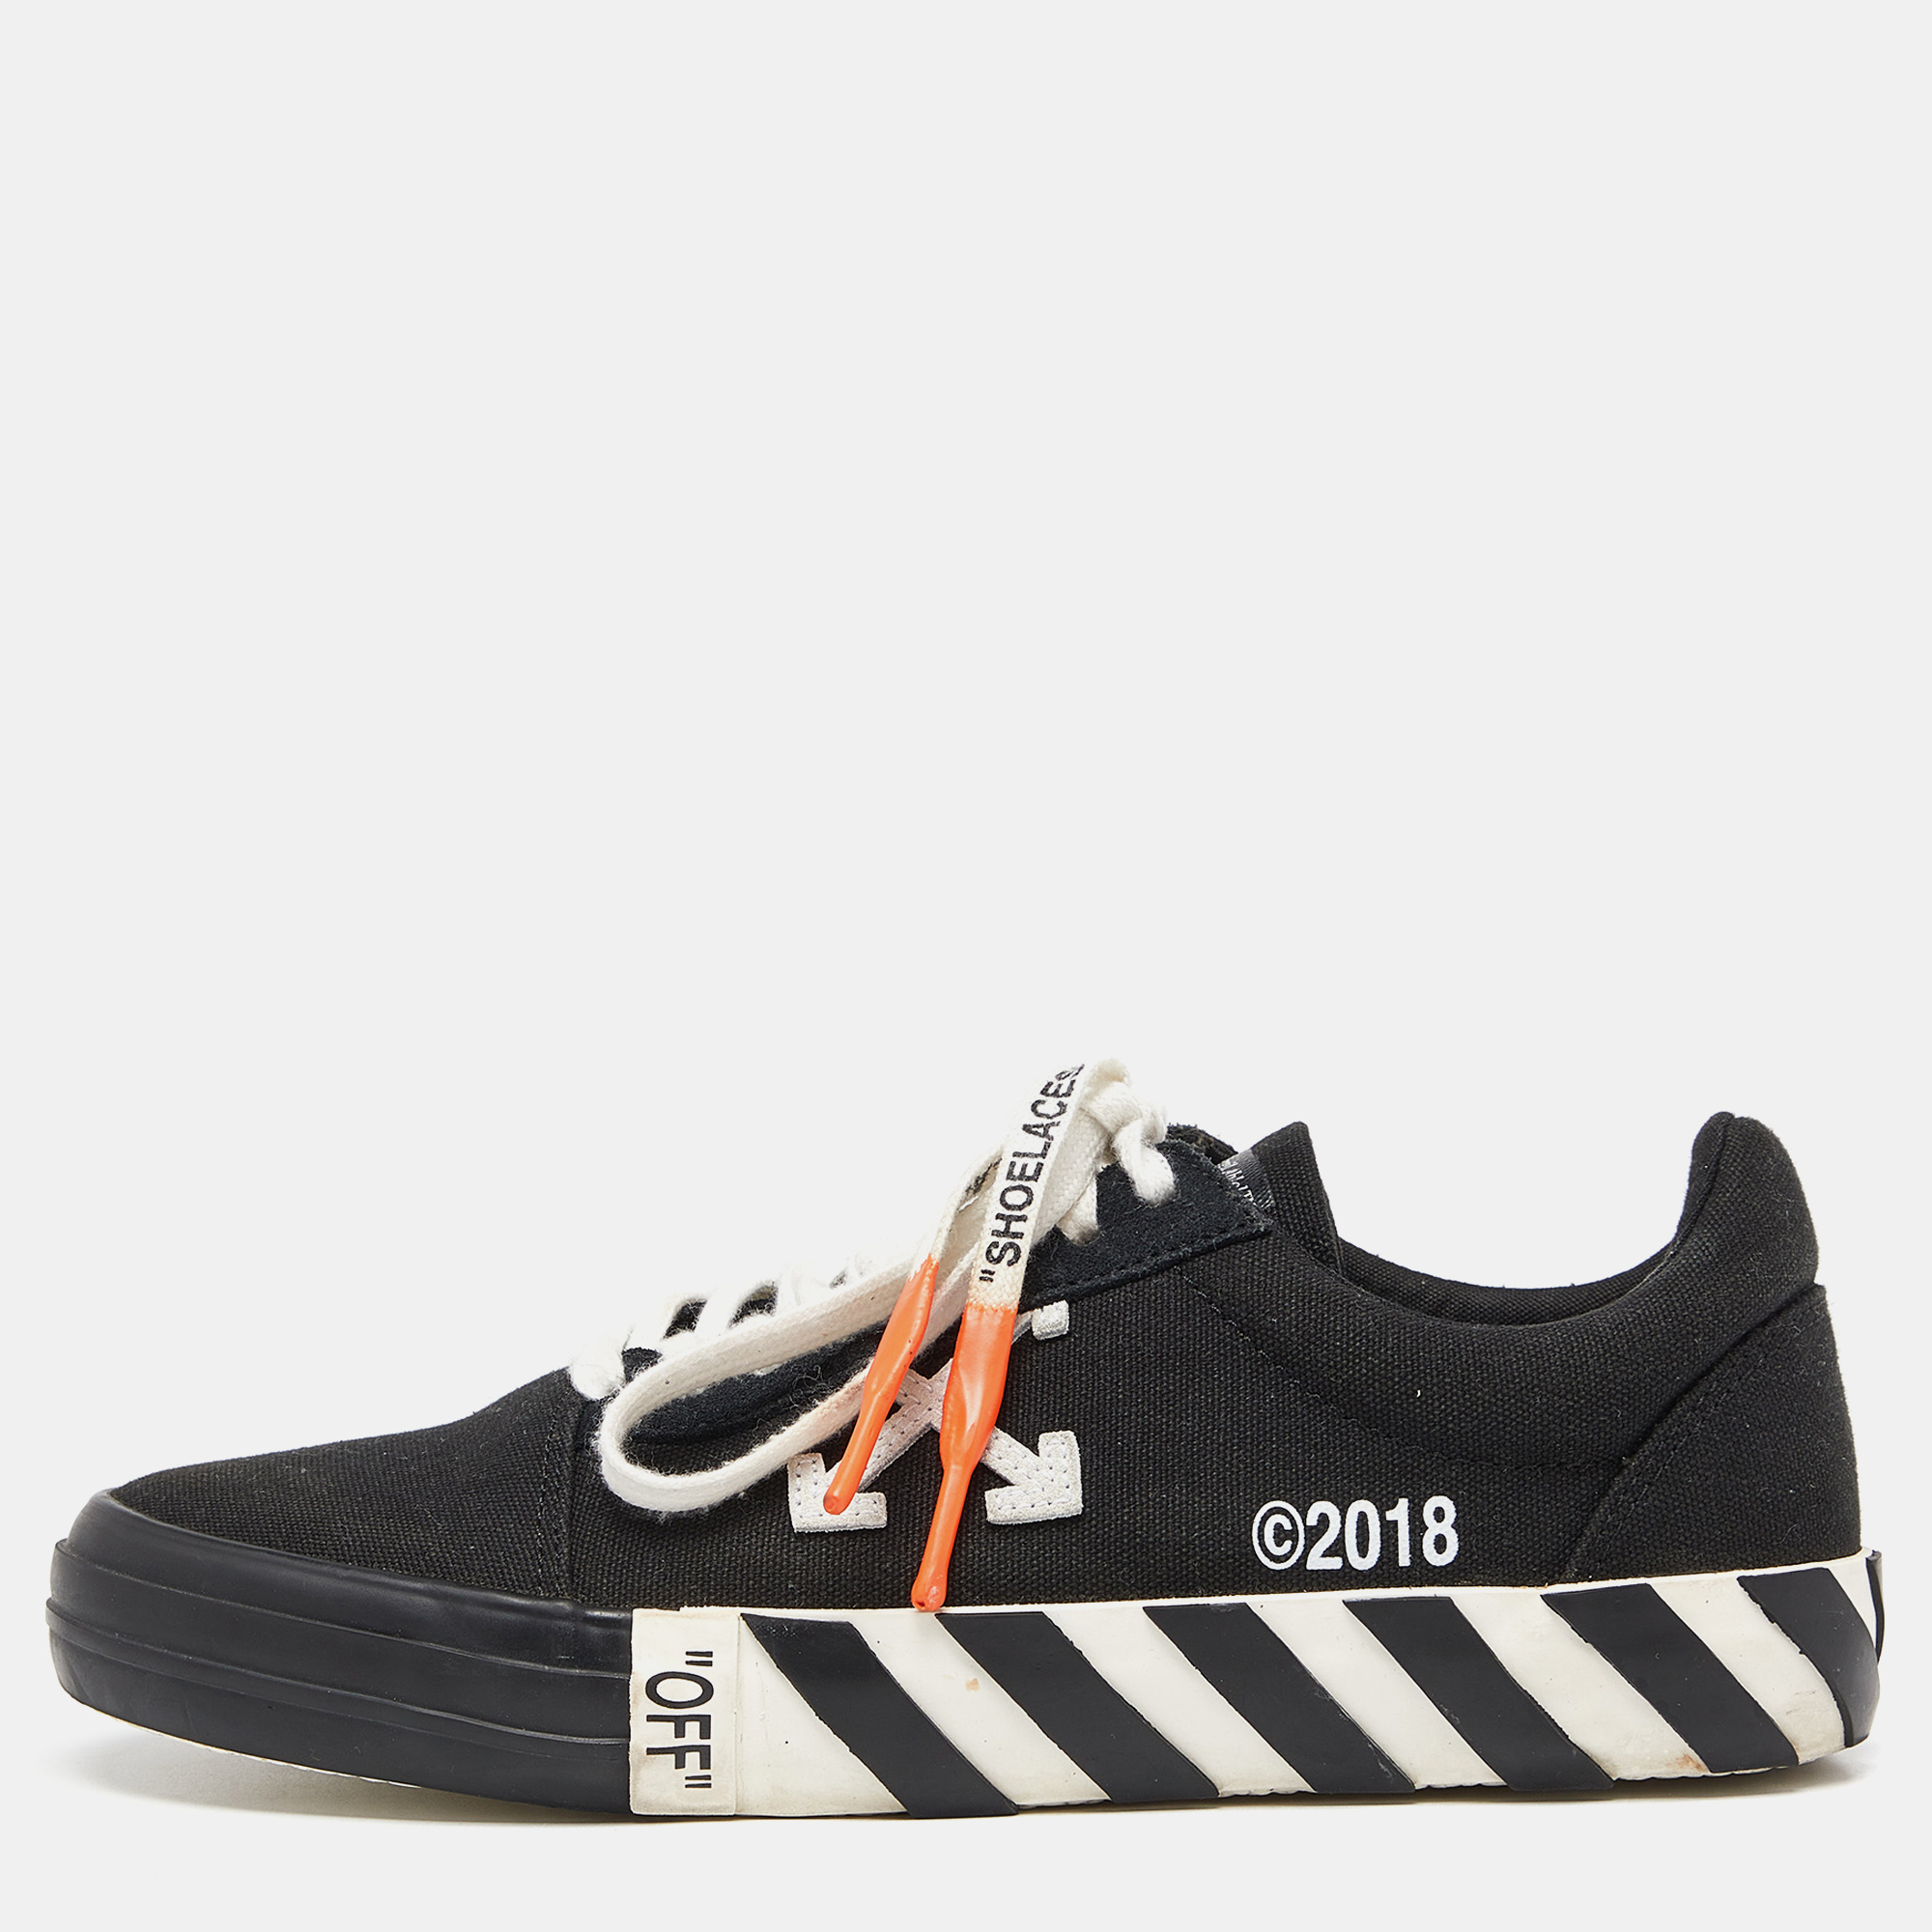 Off-White Black Canvas Vulcanized Striped Low Top Sneakers Size 41